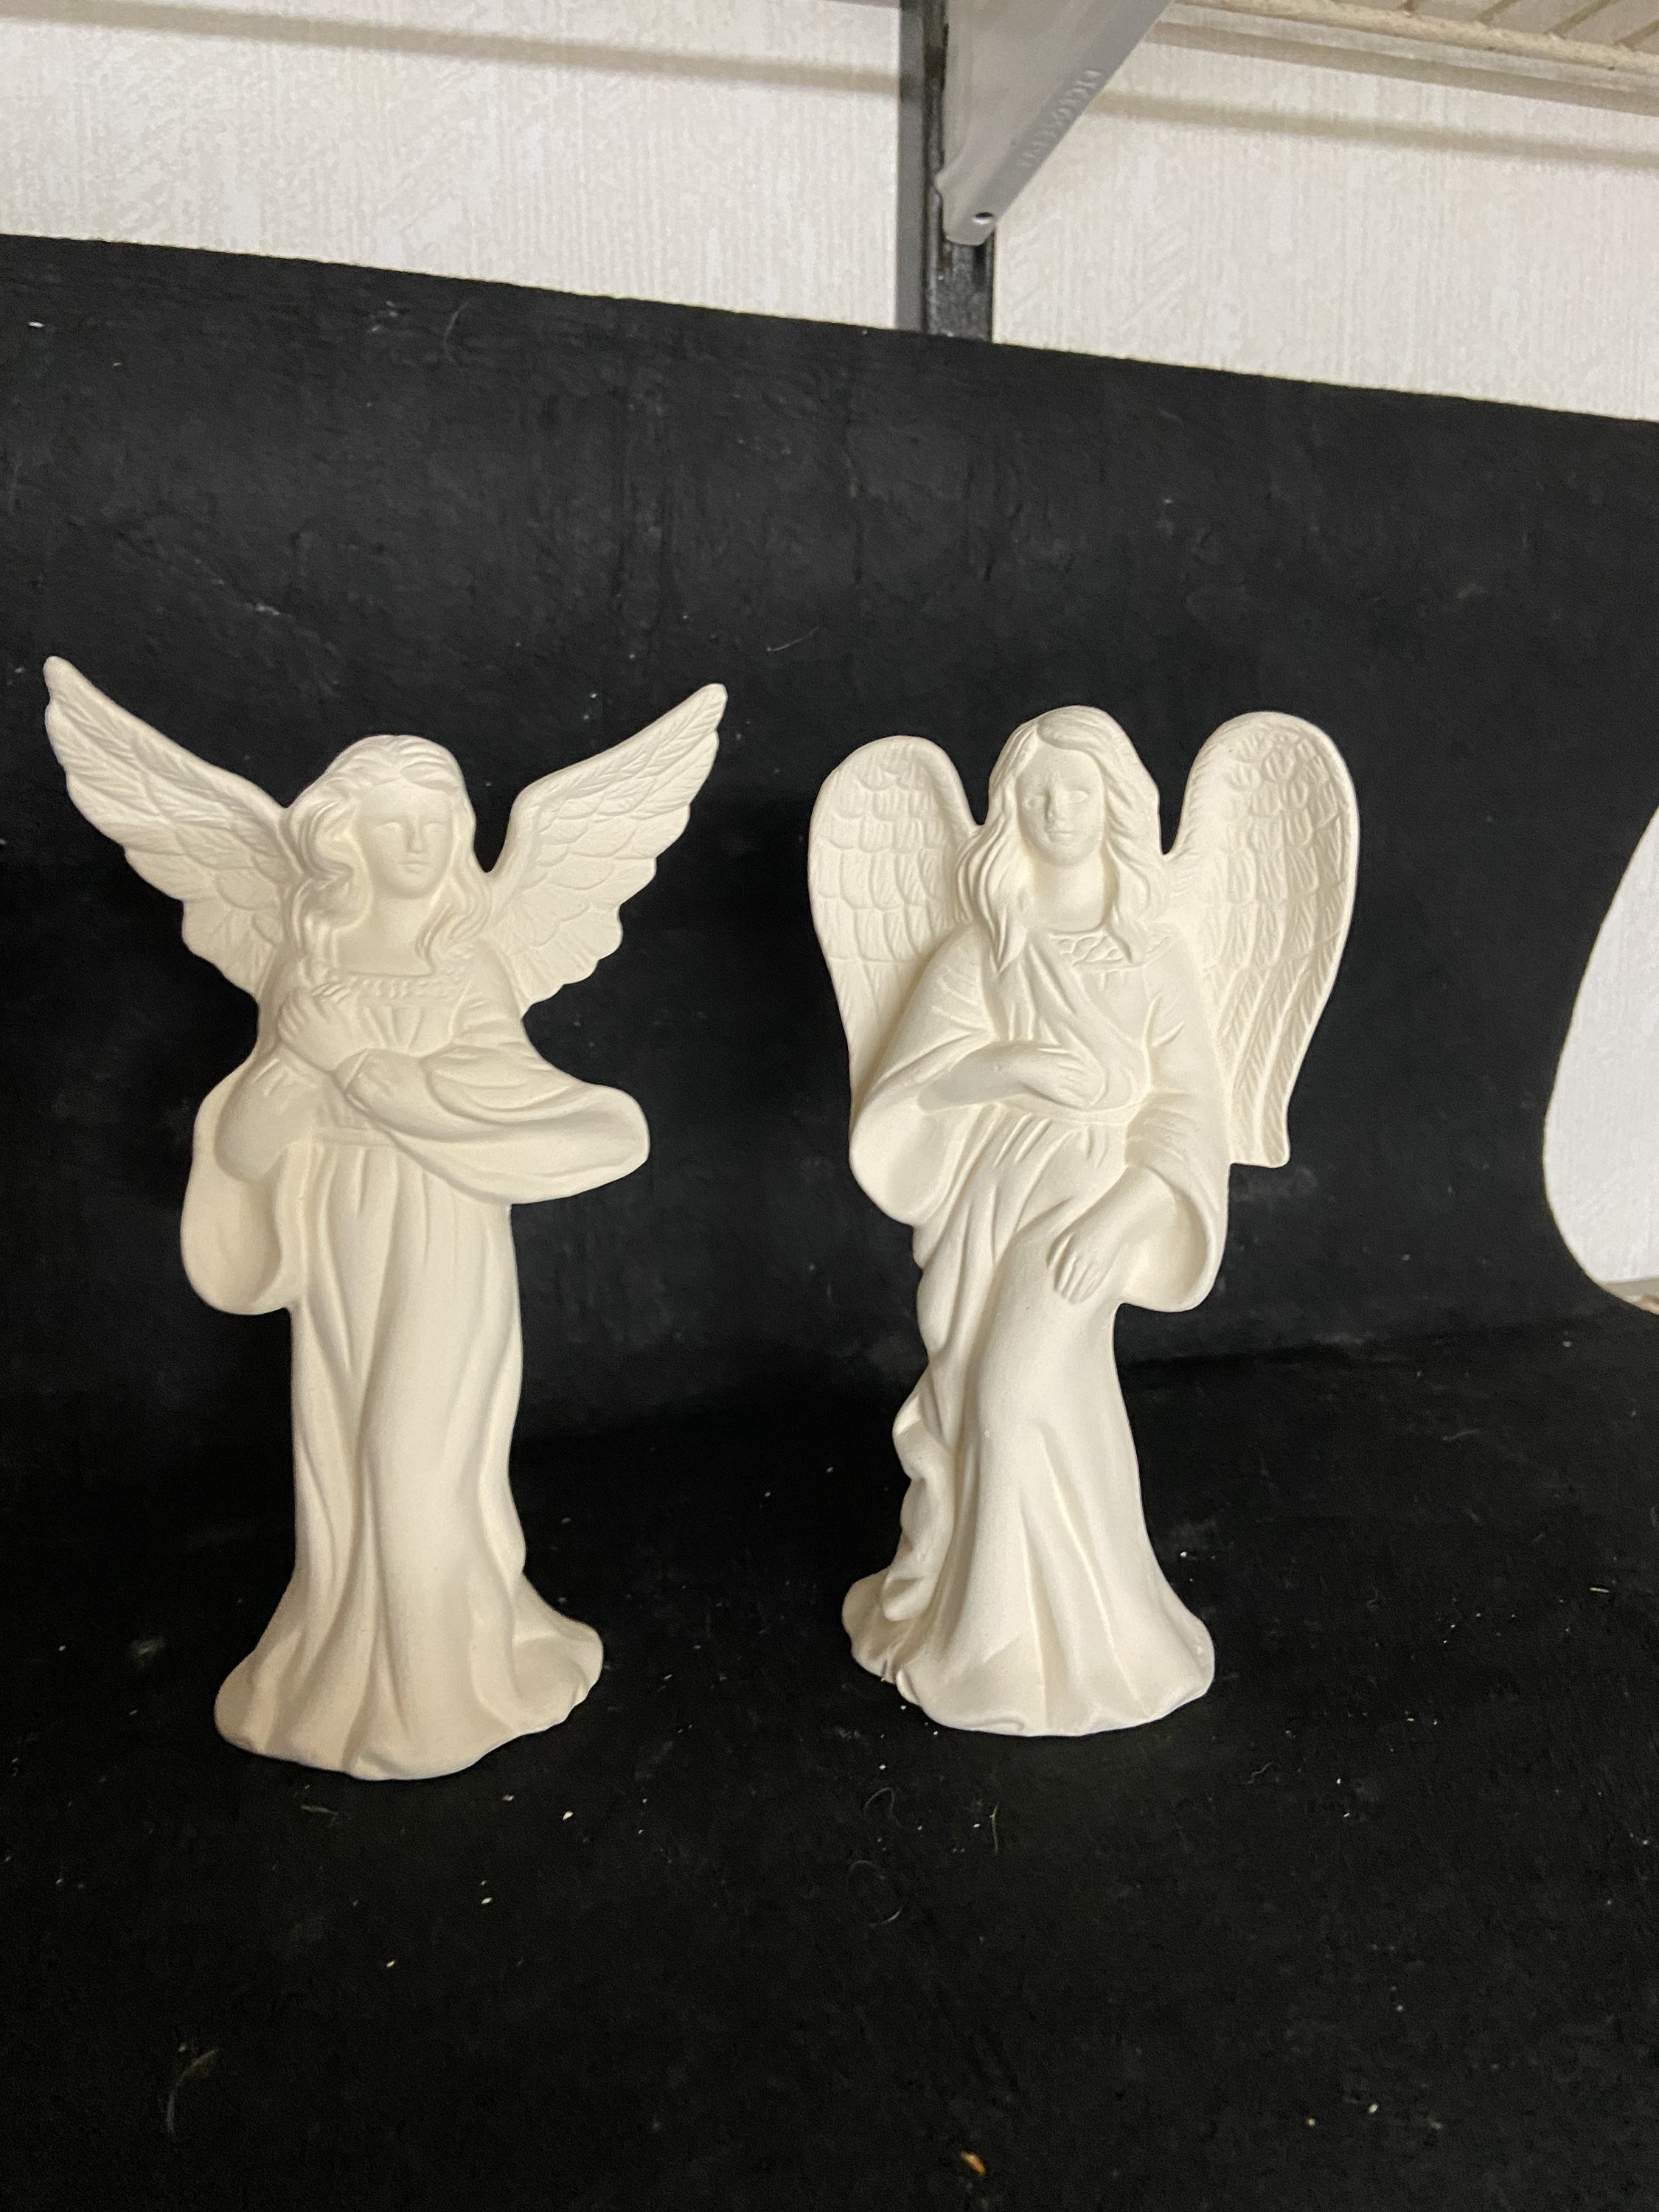 Angel Collection 4.0 Unpainted Ceramic 